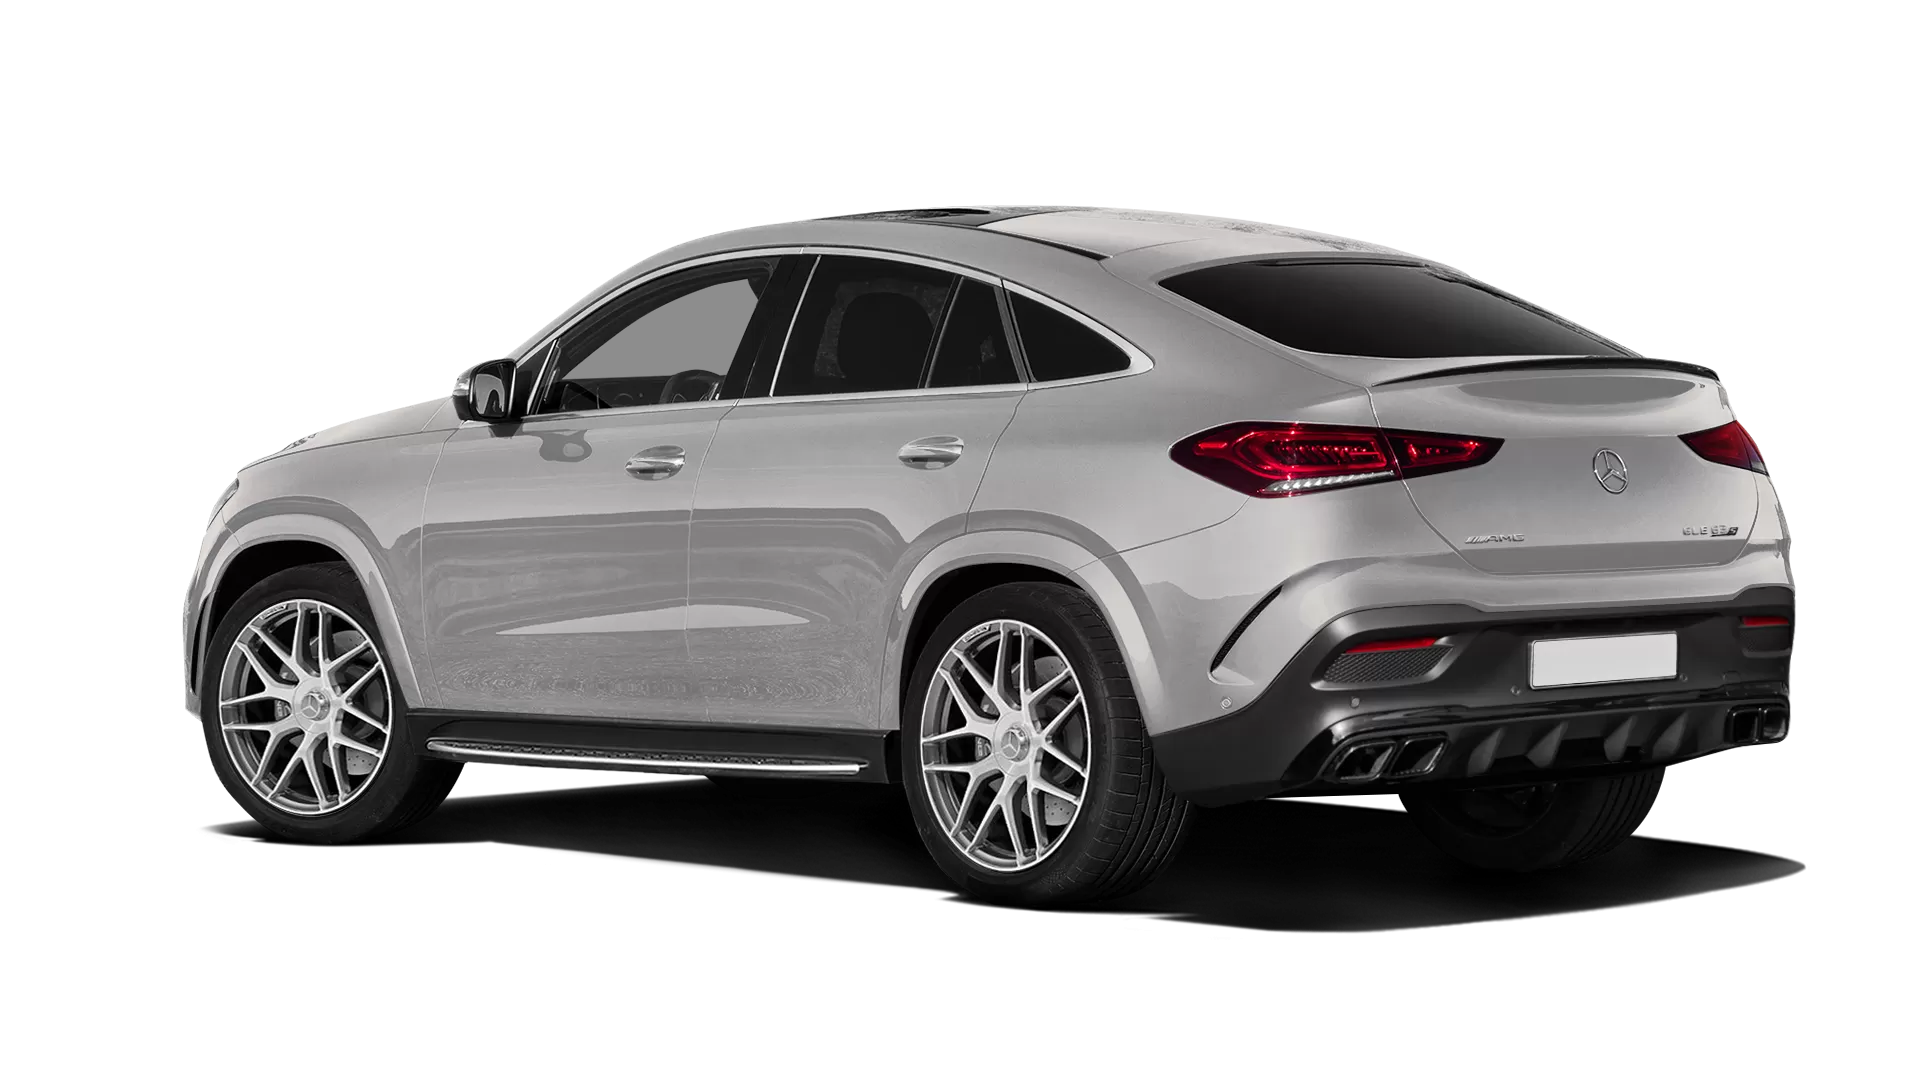 Mercedes GLE Coupe AMG 63 C167 stock rear view in Mojave Silver color